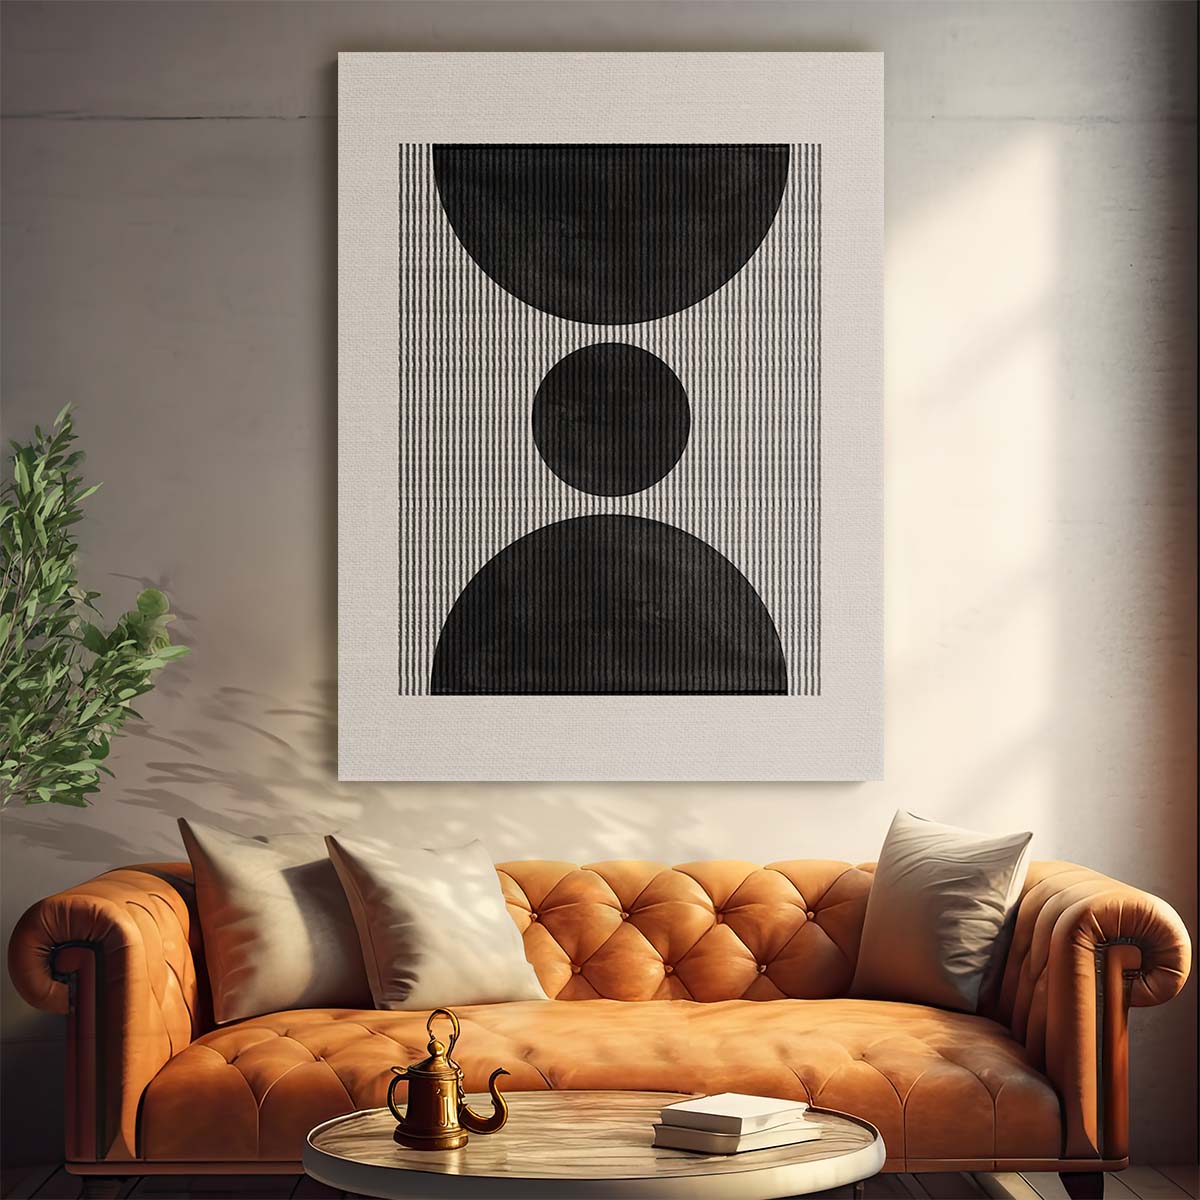 Mid-Century Beige Geometric Illustration Art with Abstract Shapes by Luxuriance Designs, made in USA